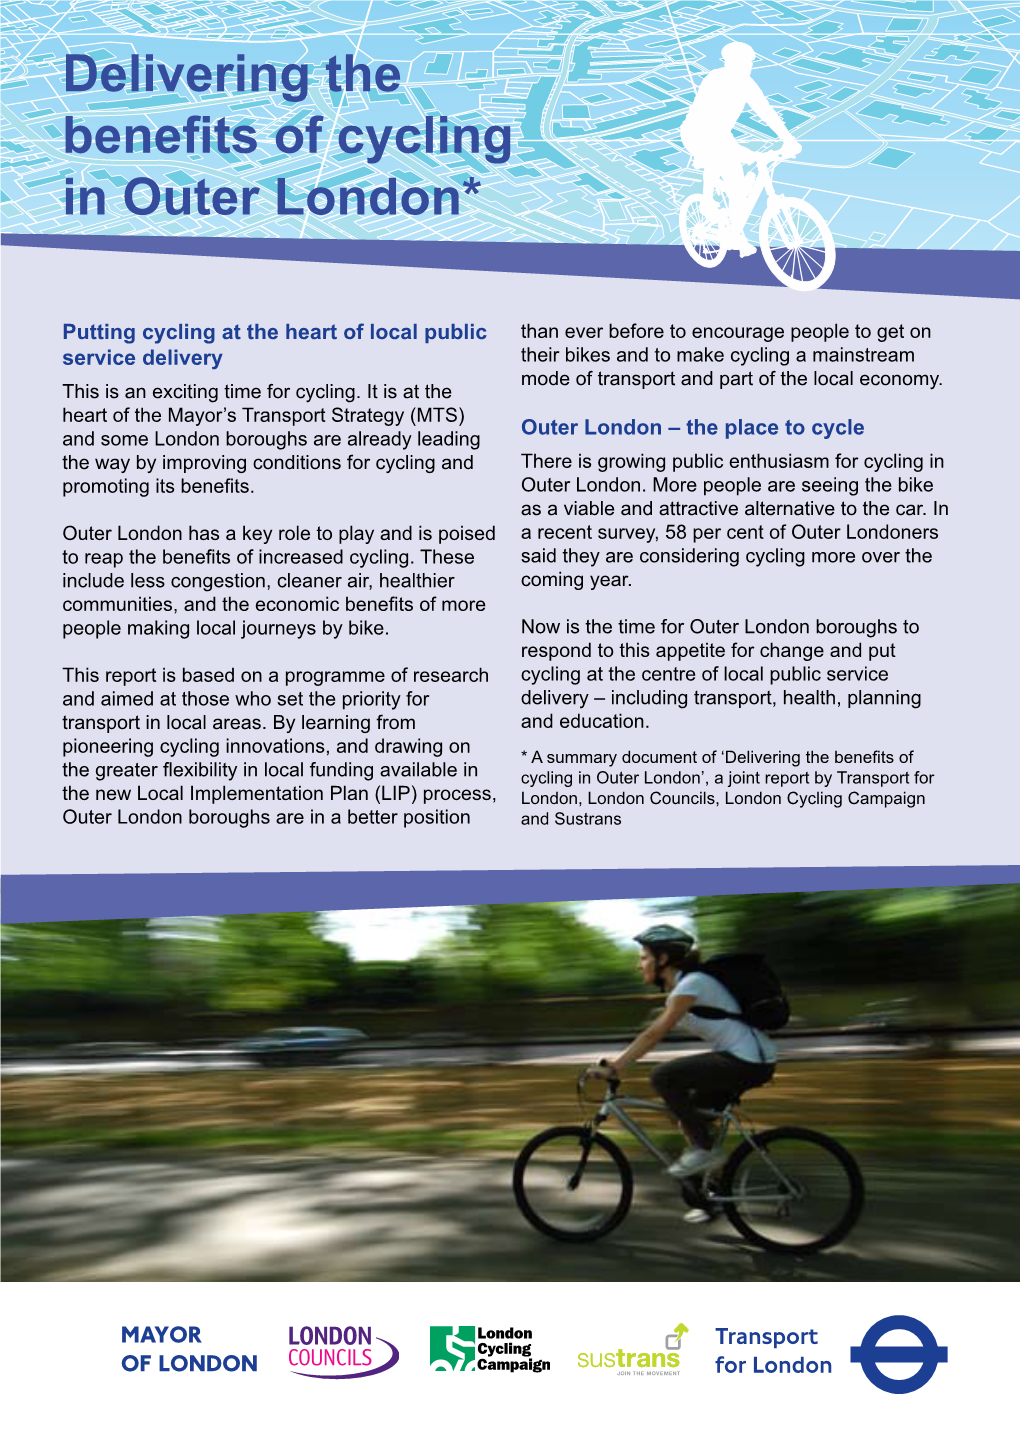 Delivering the Benefits of Cycling in Outer London*